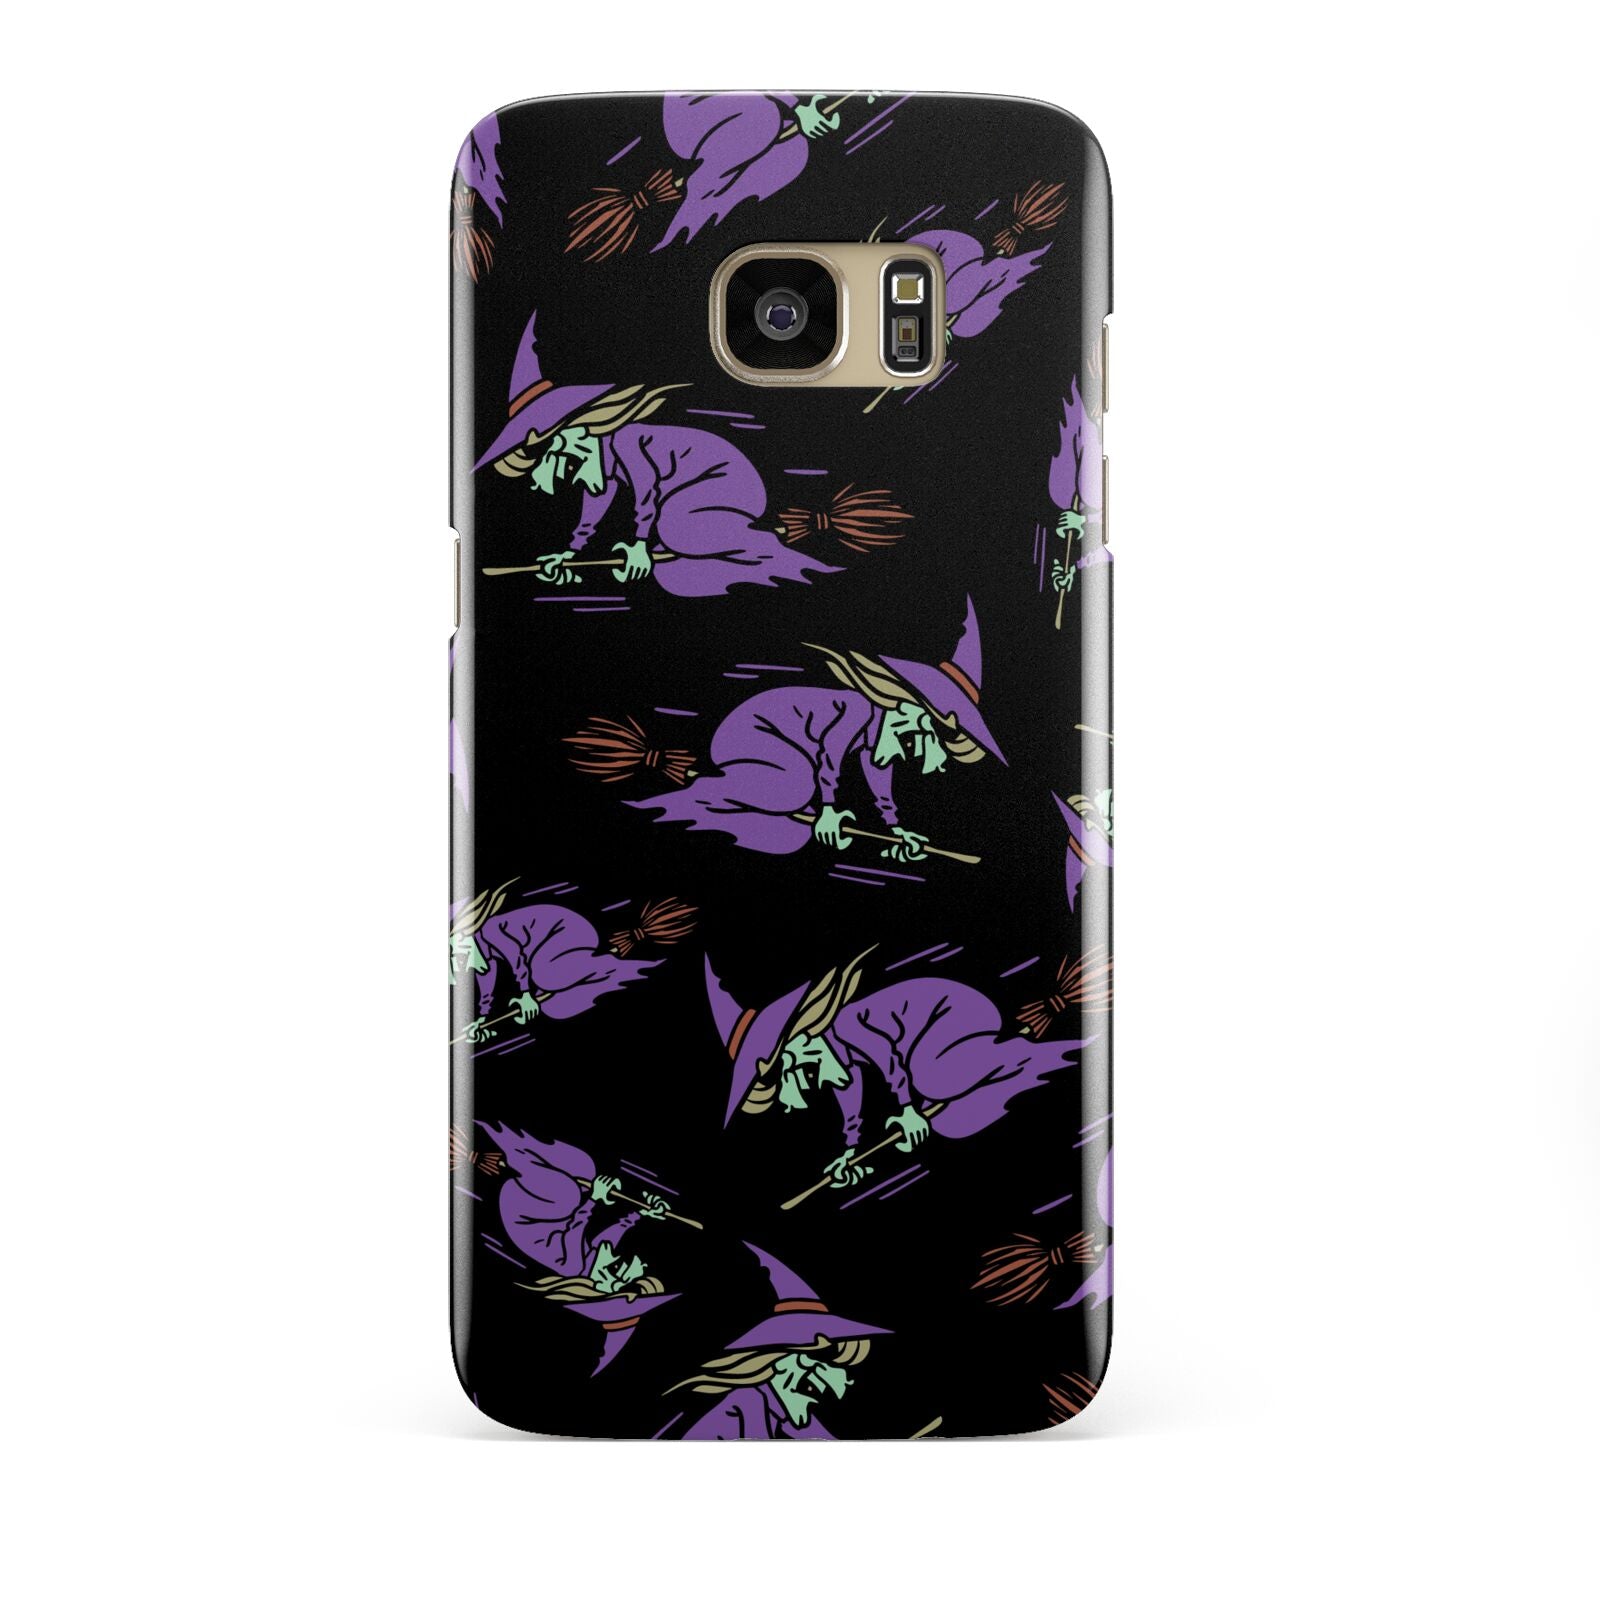 Flying Witches Samsung Galaxy S7 Edge Case